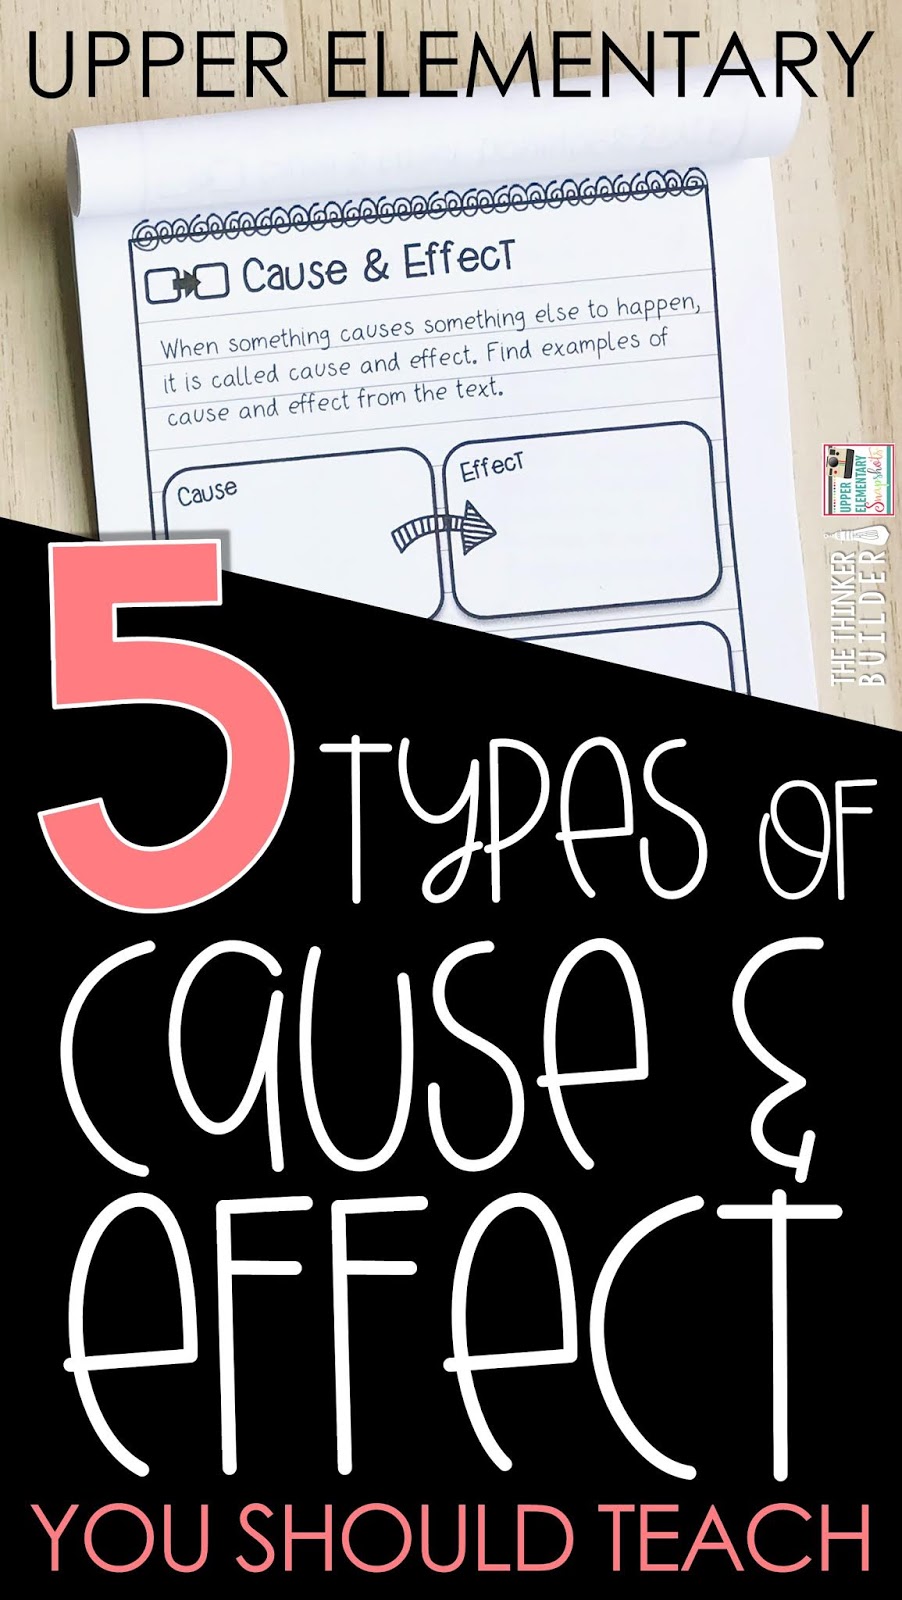 a cause and effect essay should be sequential meaning it